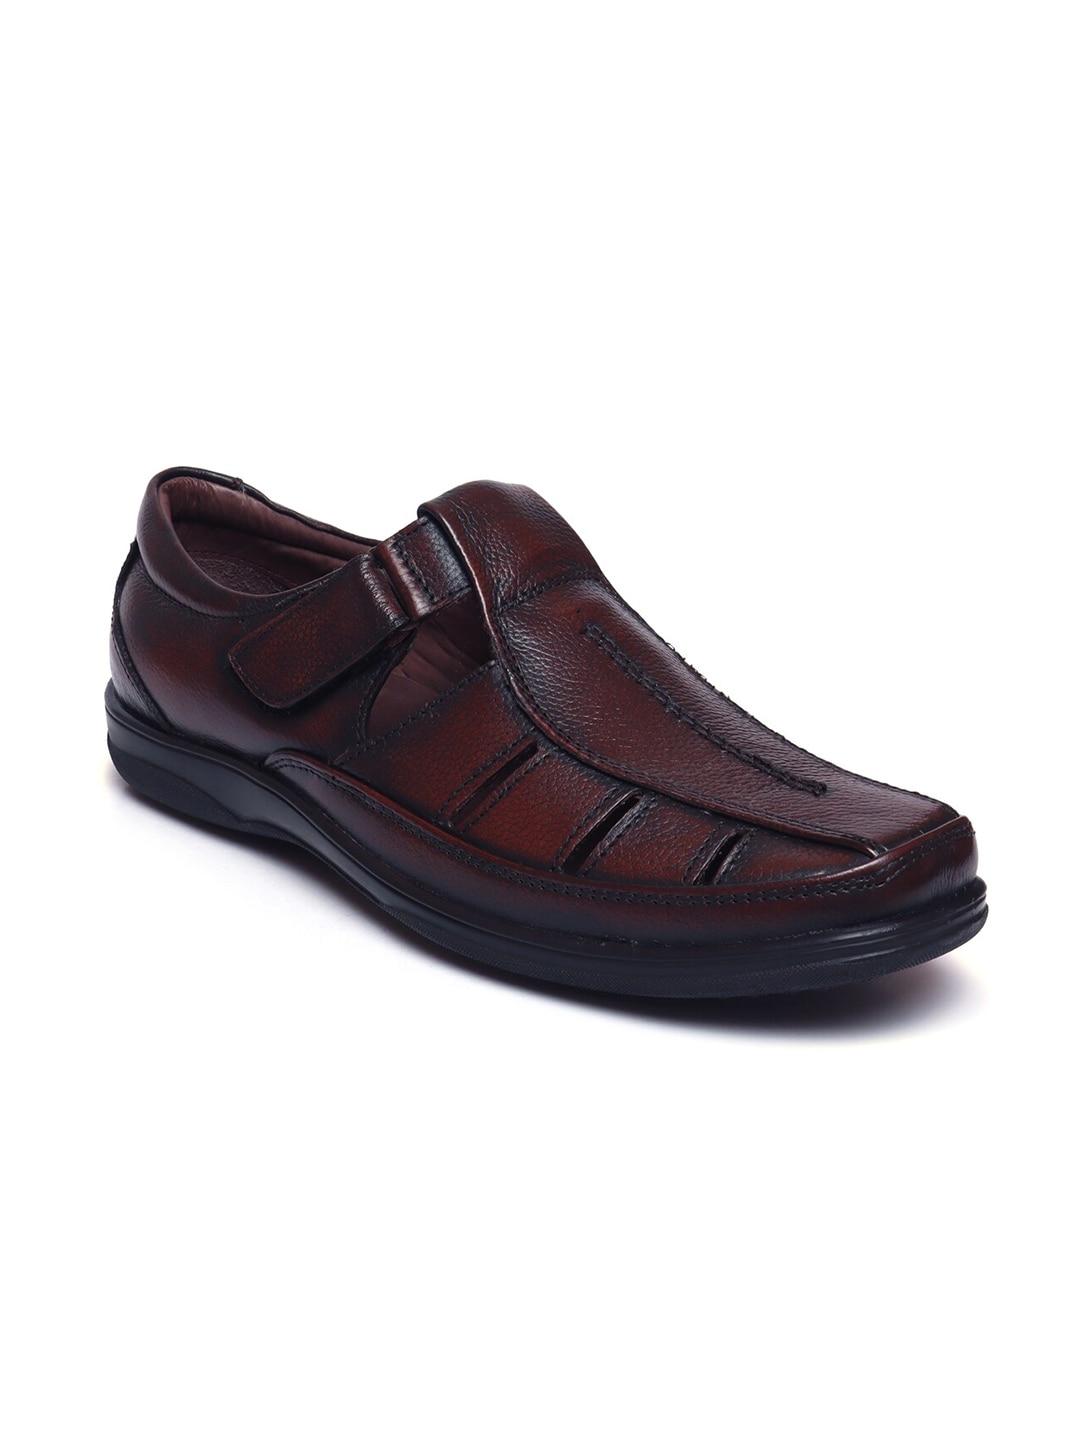 zoom shoes men brown leather shoe-style sandals